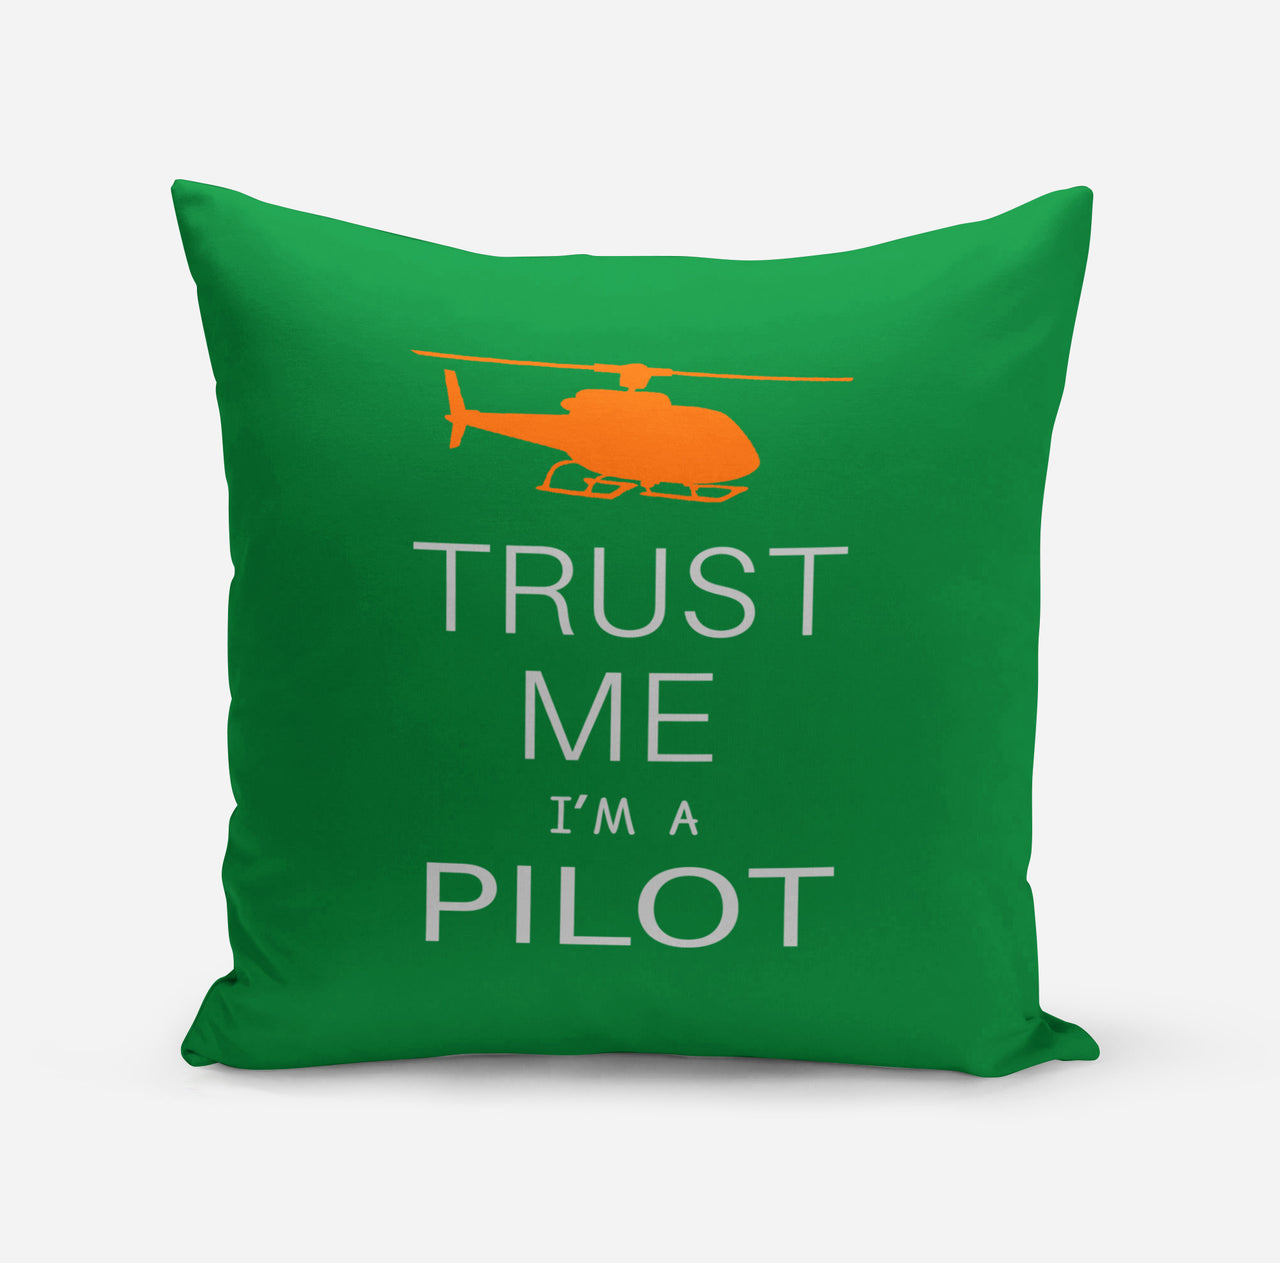 Trust Me I'm a Pilot (Helicopter) Designed Pillows